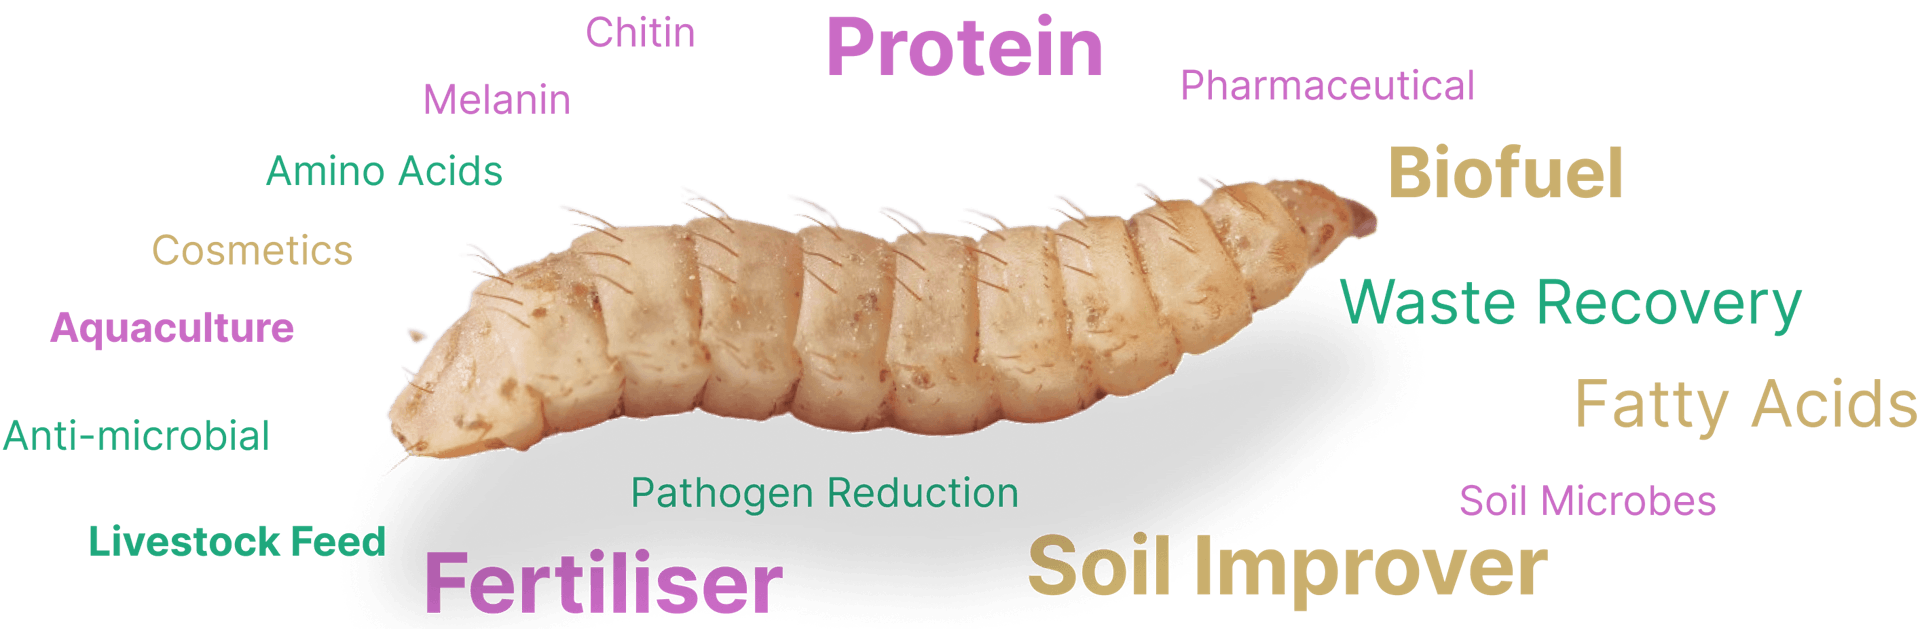 wordcloud-larvae - Chitin,Protein,Melanin,Pharmaceutical,Amino,Cosmetics,Aquaculture,Anti-microbial,Pathogen Reduction,Livestock Feed Fertiliser,Biofuel,Waste Recovery,Fatty-acids,Soil Microbes,Soil Improver